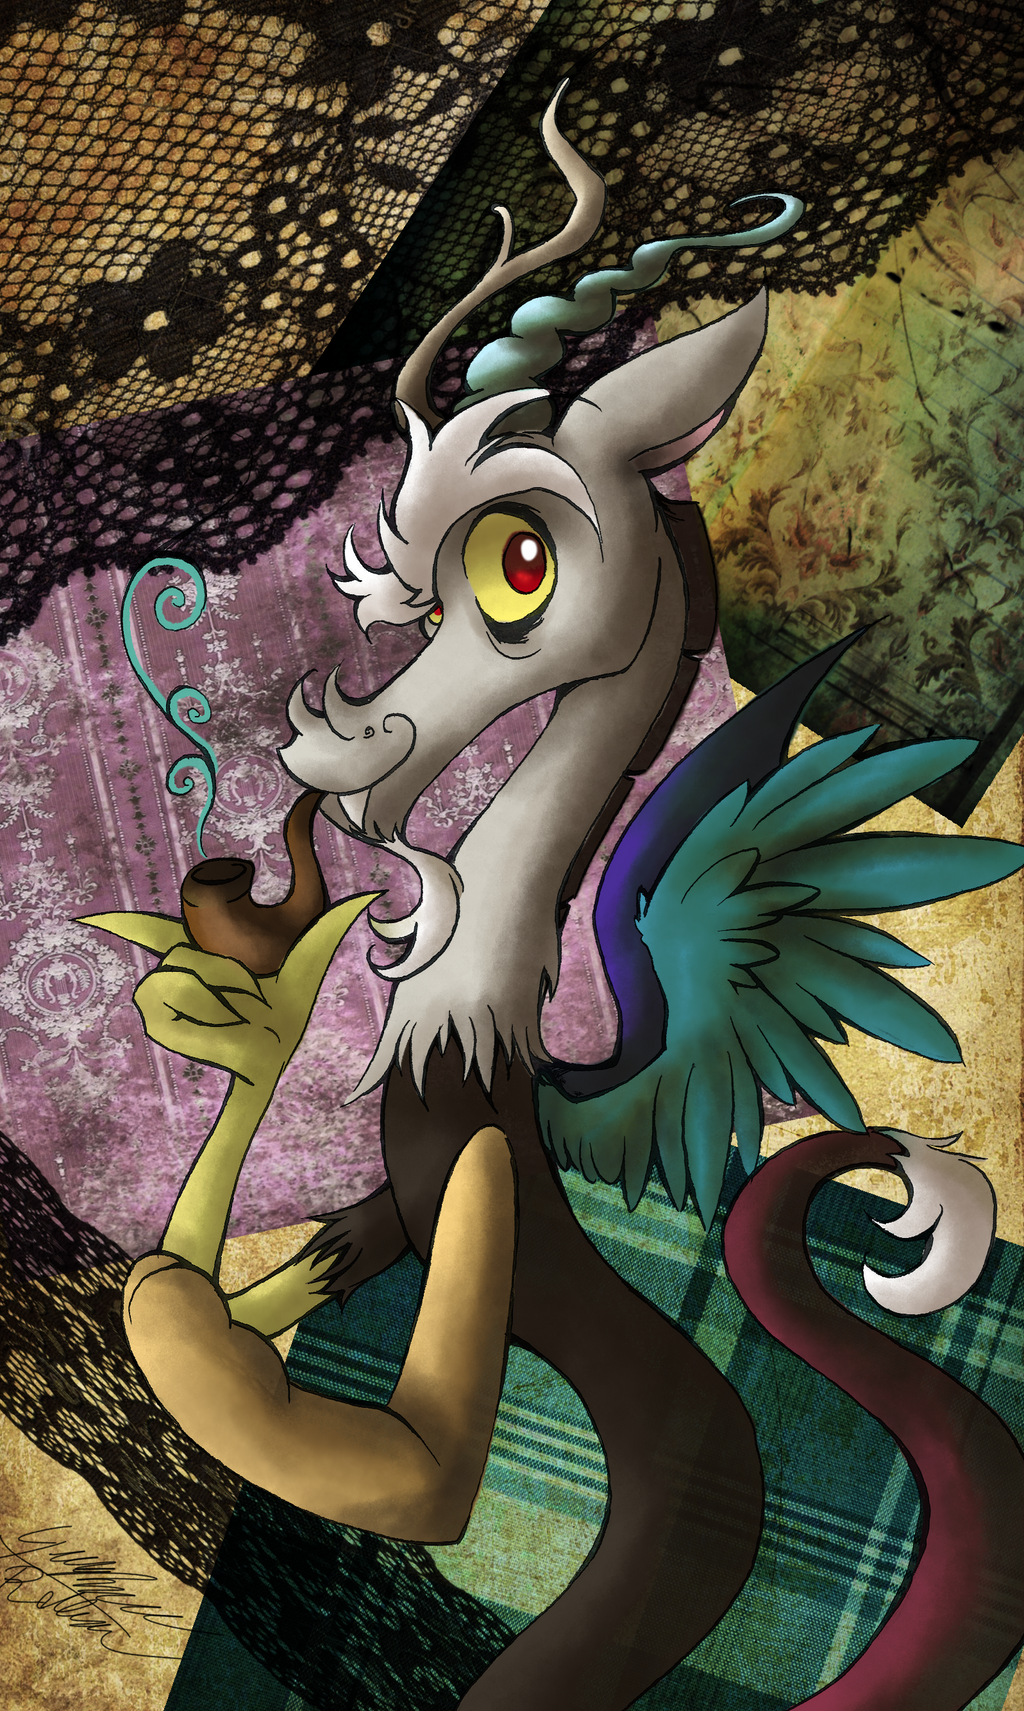 [Obrázek: hodge_podge_by_midnameowfries-d8fz7nr.png]